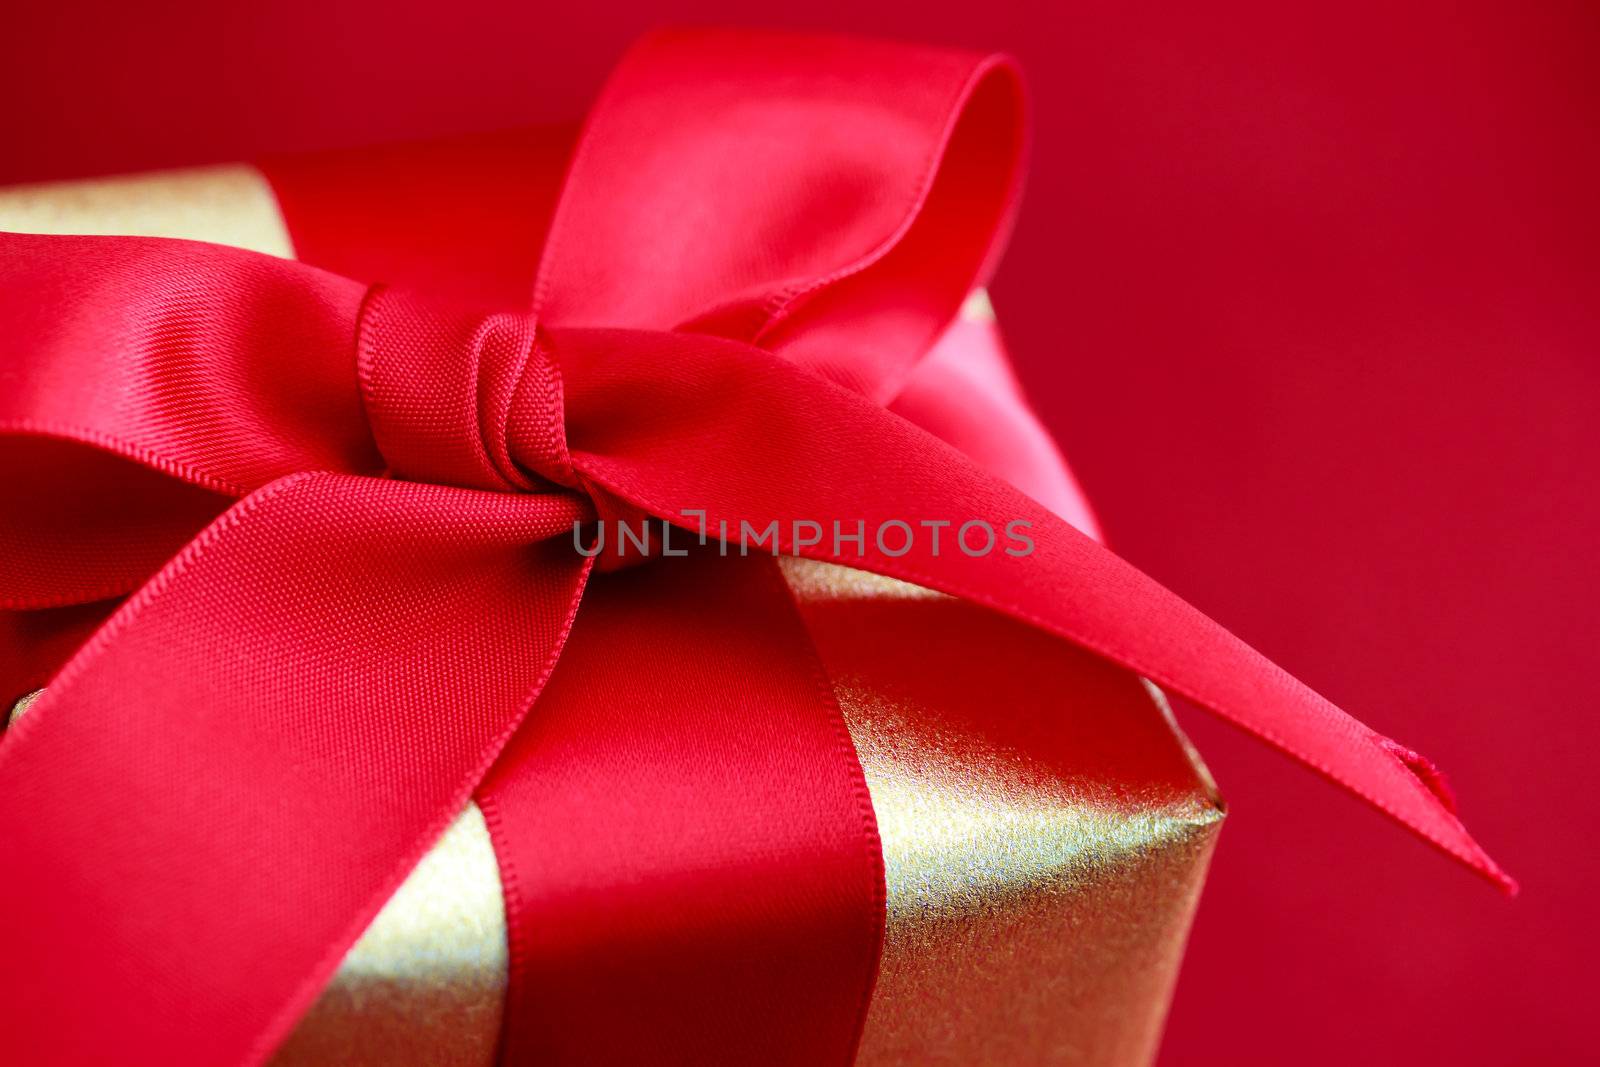 Gift box with red ribbon on red background